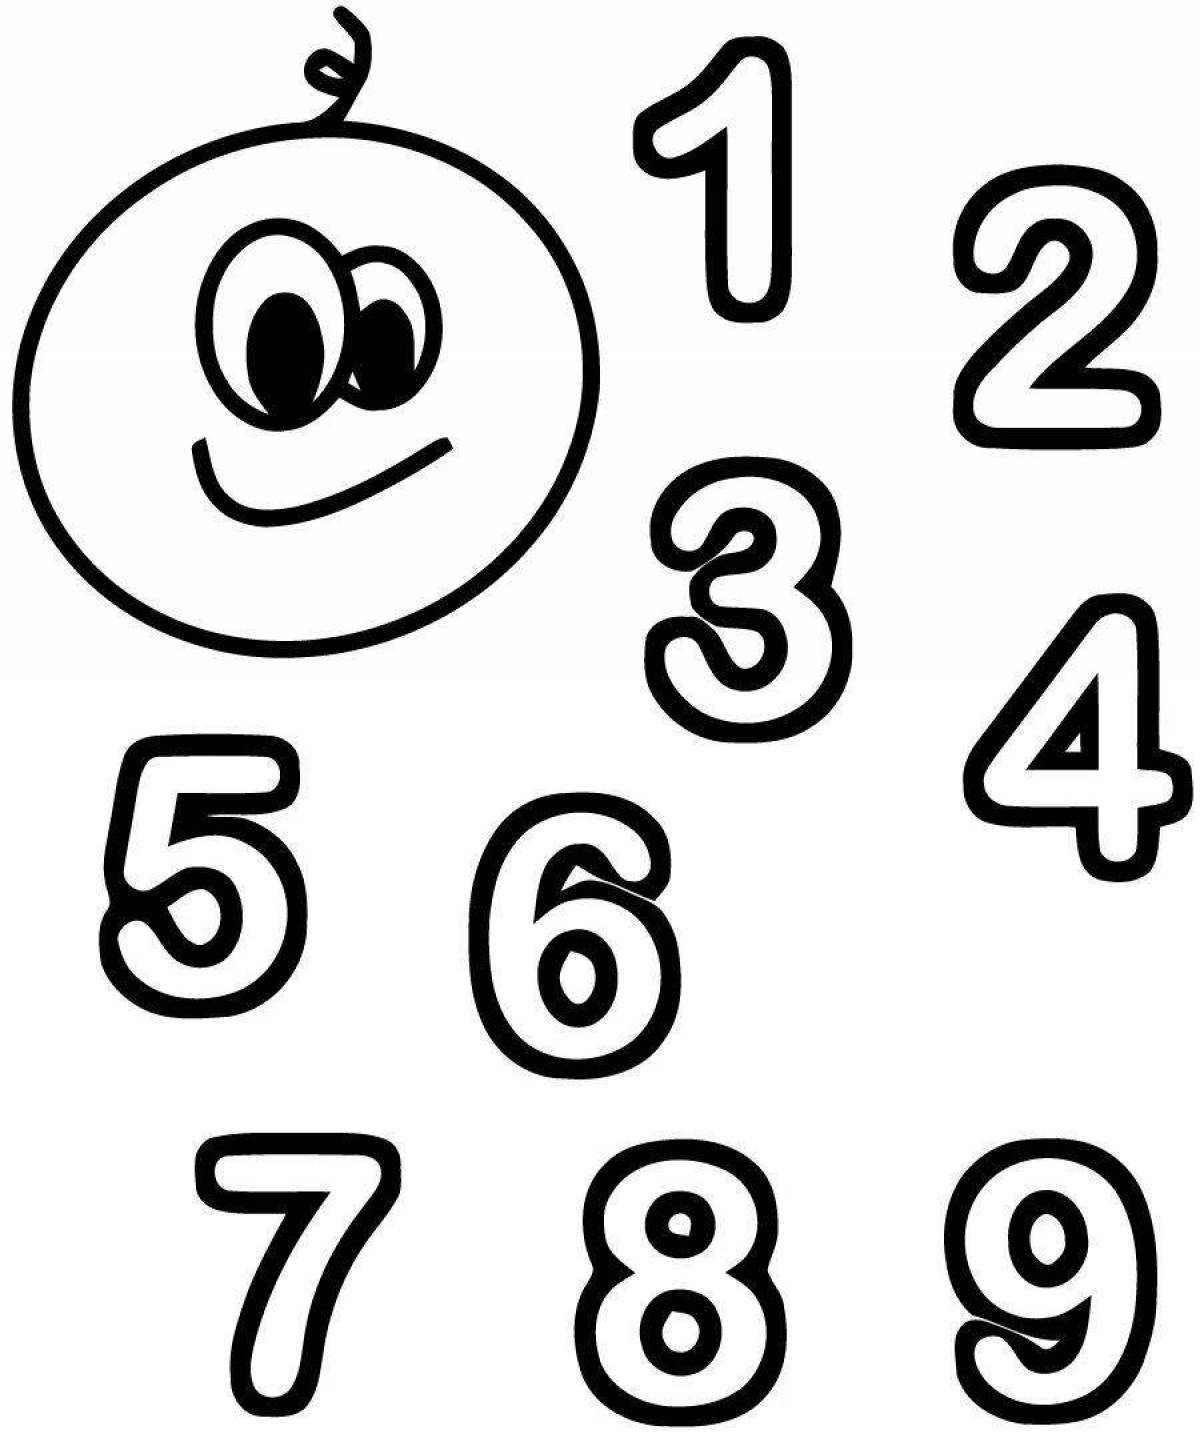 Coloring page numbers color-explosion